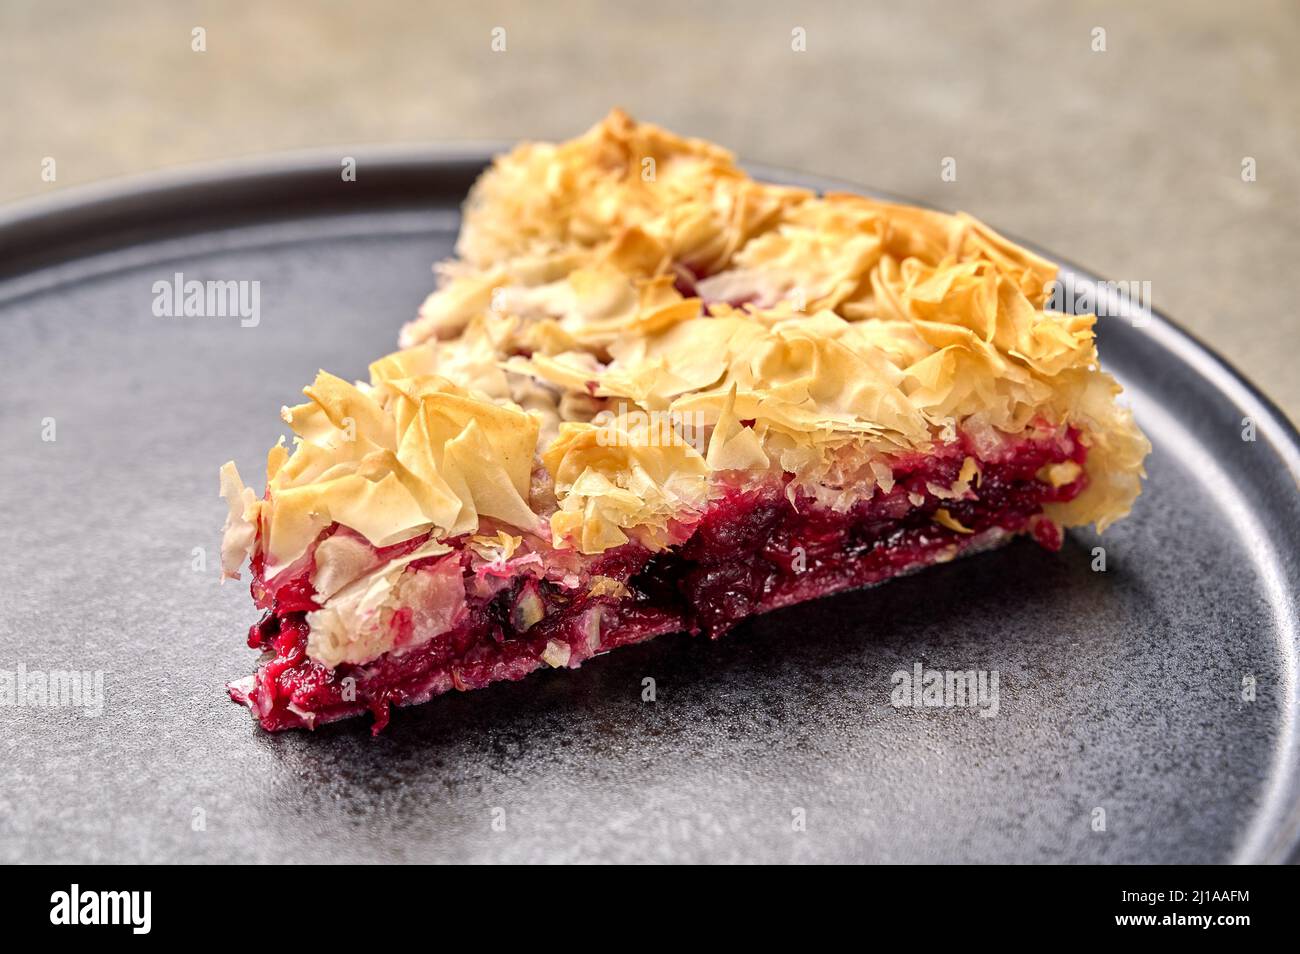 Piece of homemade cherry pie from filo dough on dark plate. Selective focus, close up Stock Photo